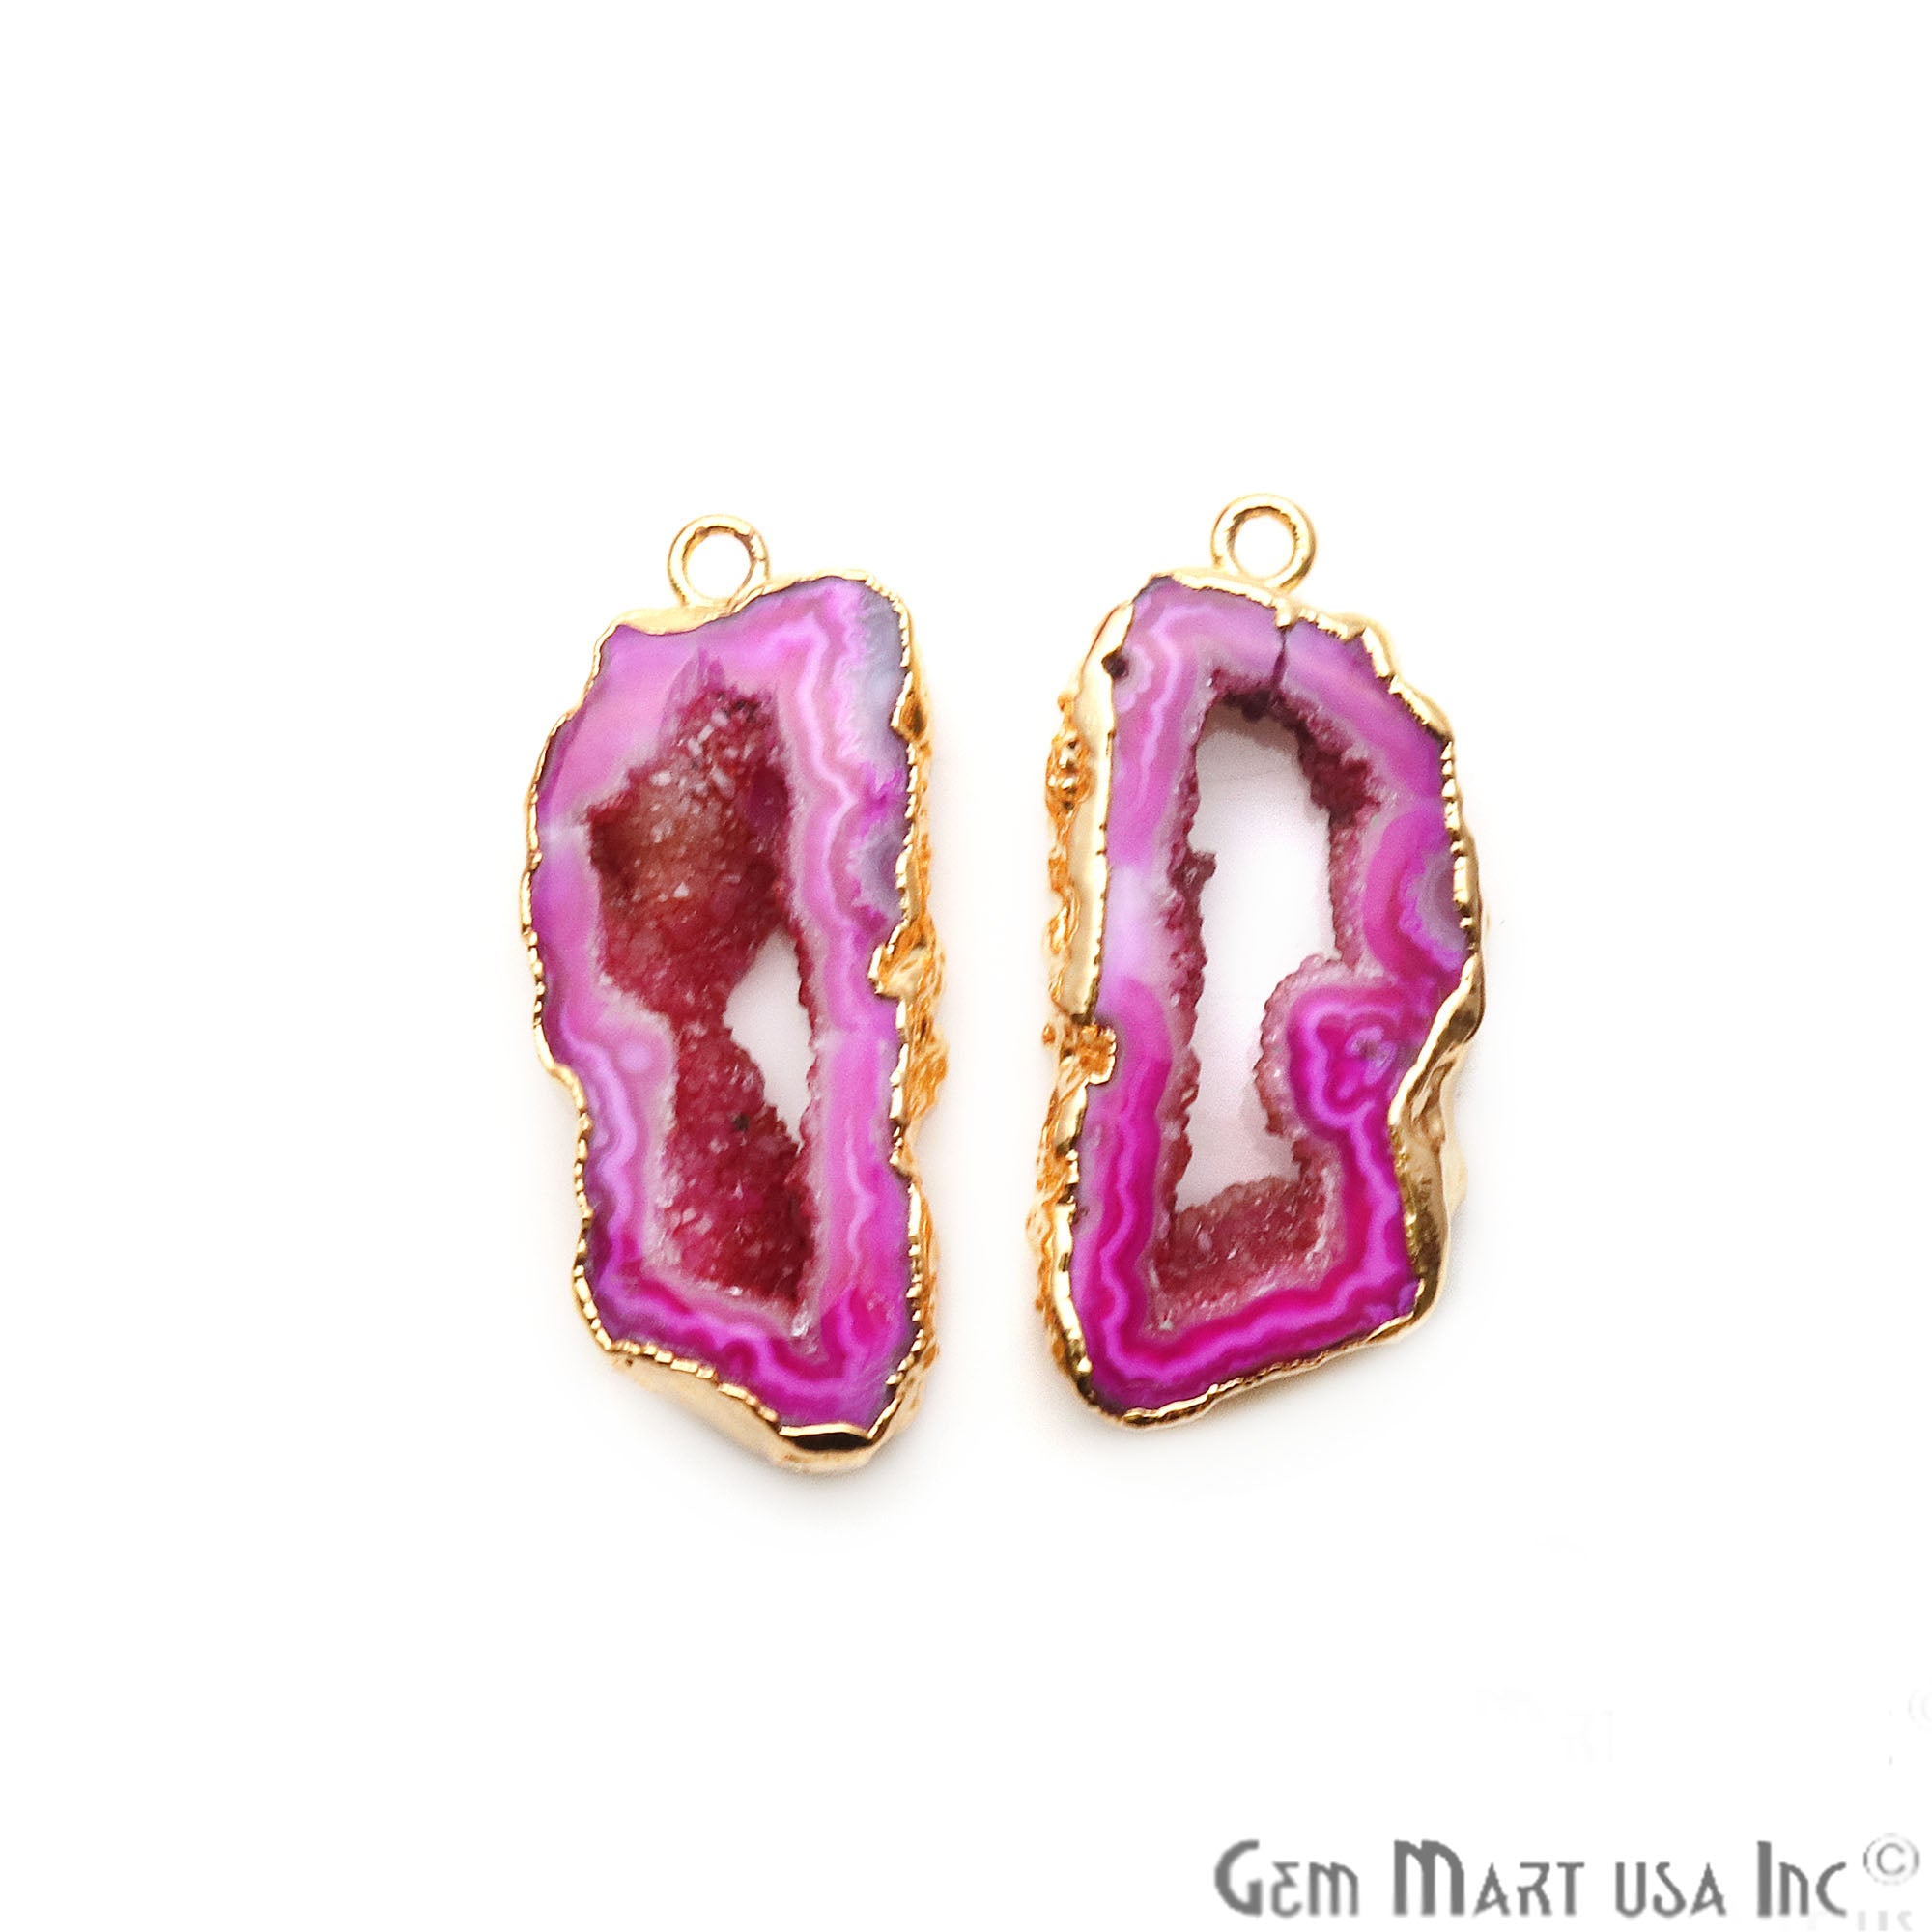 Agate Slice 16x33mm Organic Gold Electroplated Gemstone Earring Connector 1 Pair - GemMartUSA